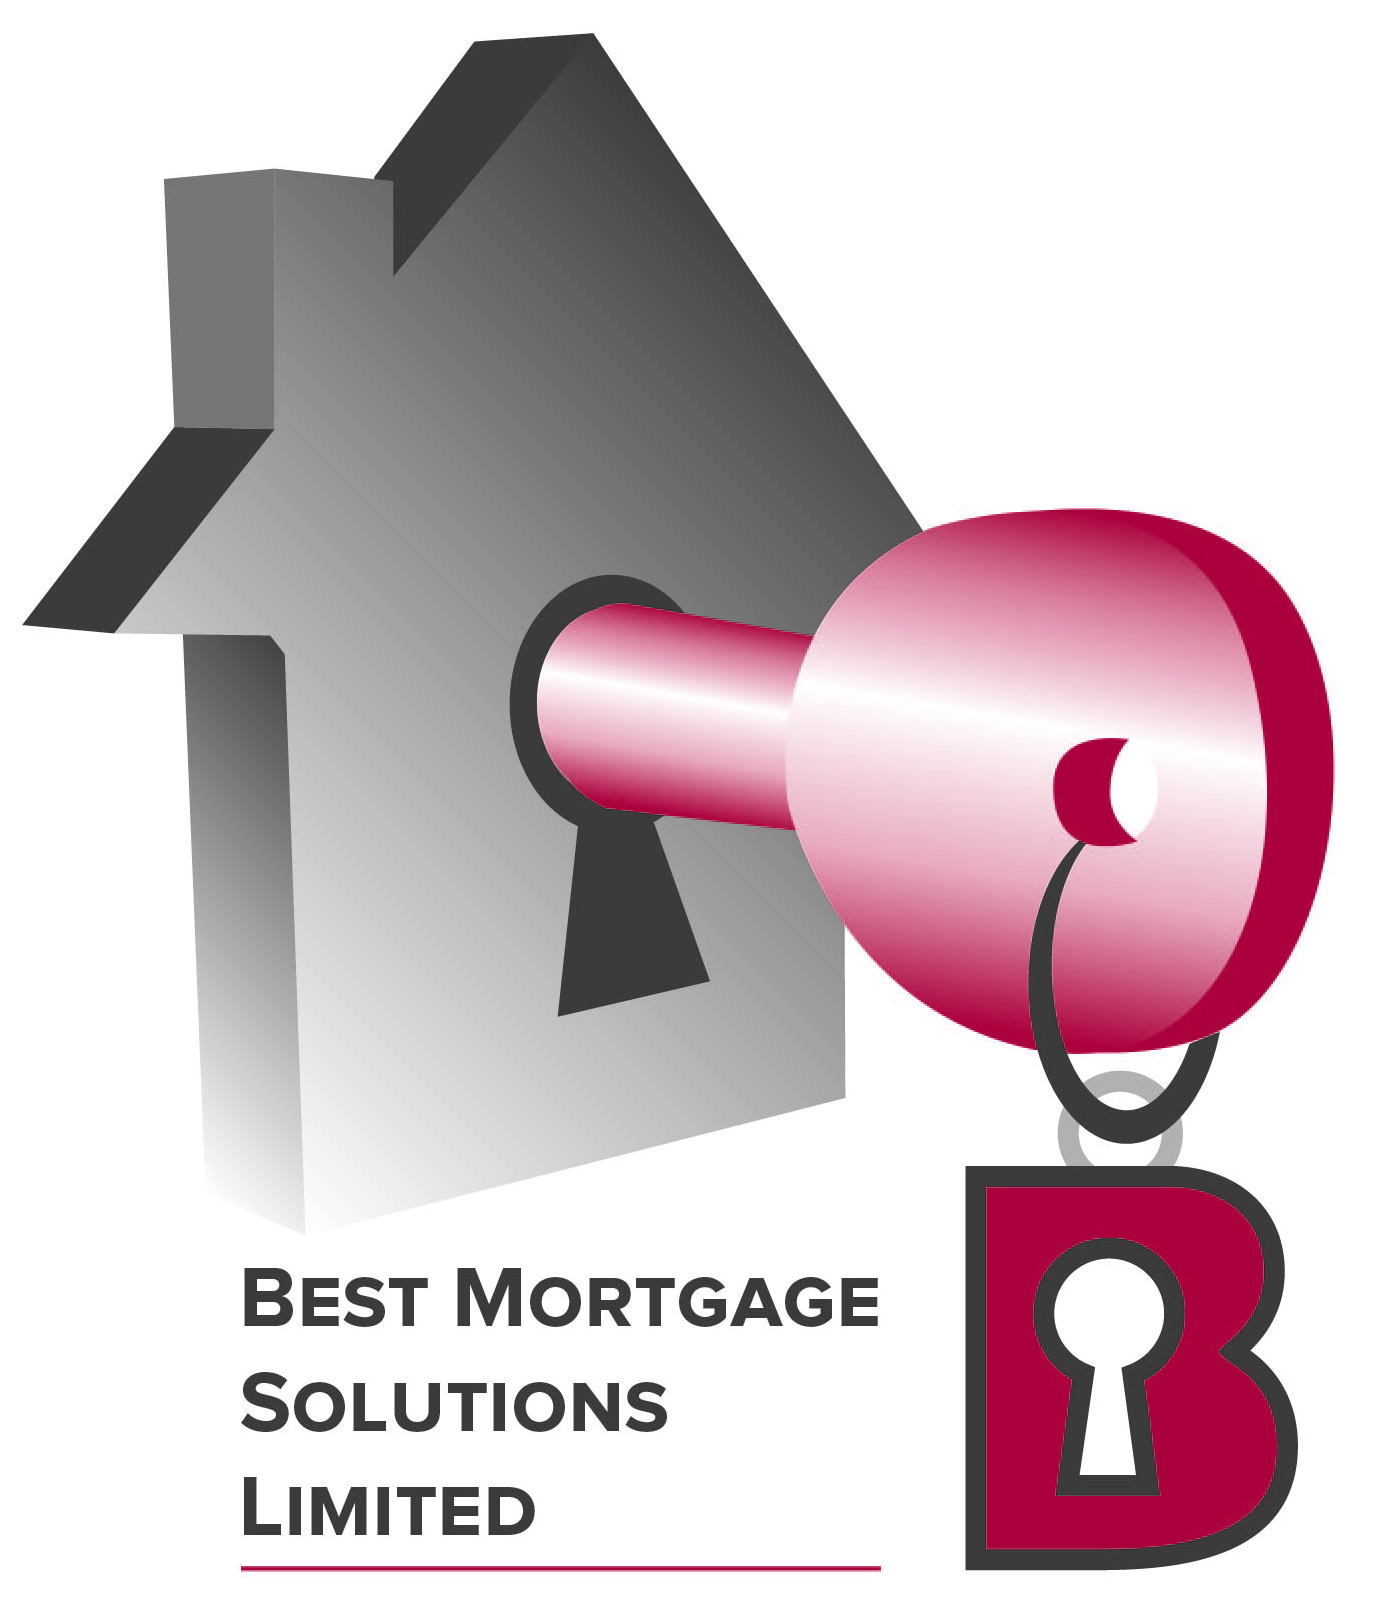 Best Mortgage Solutions